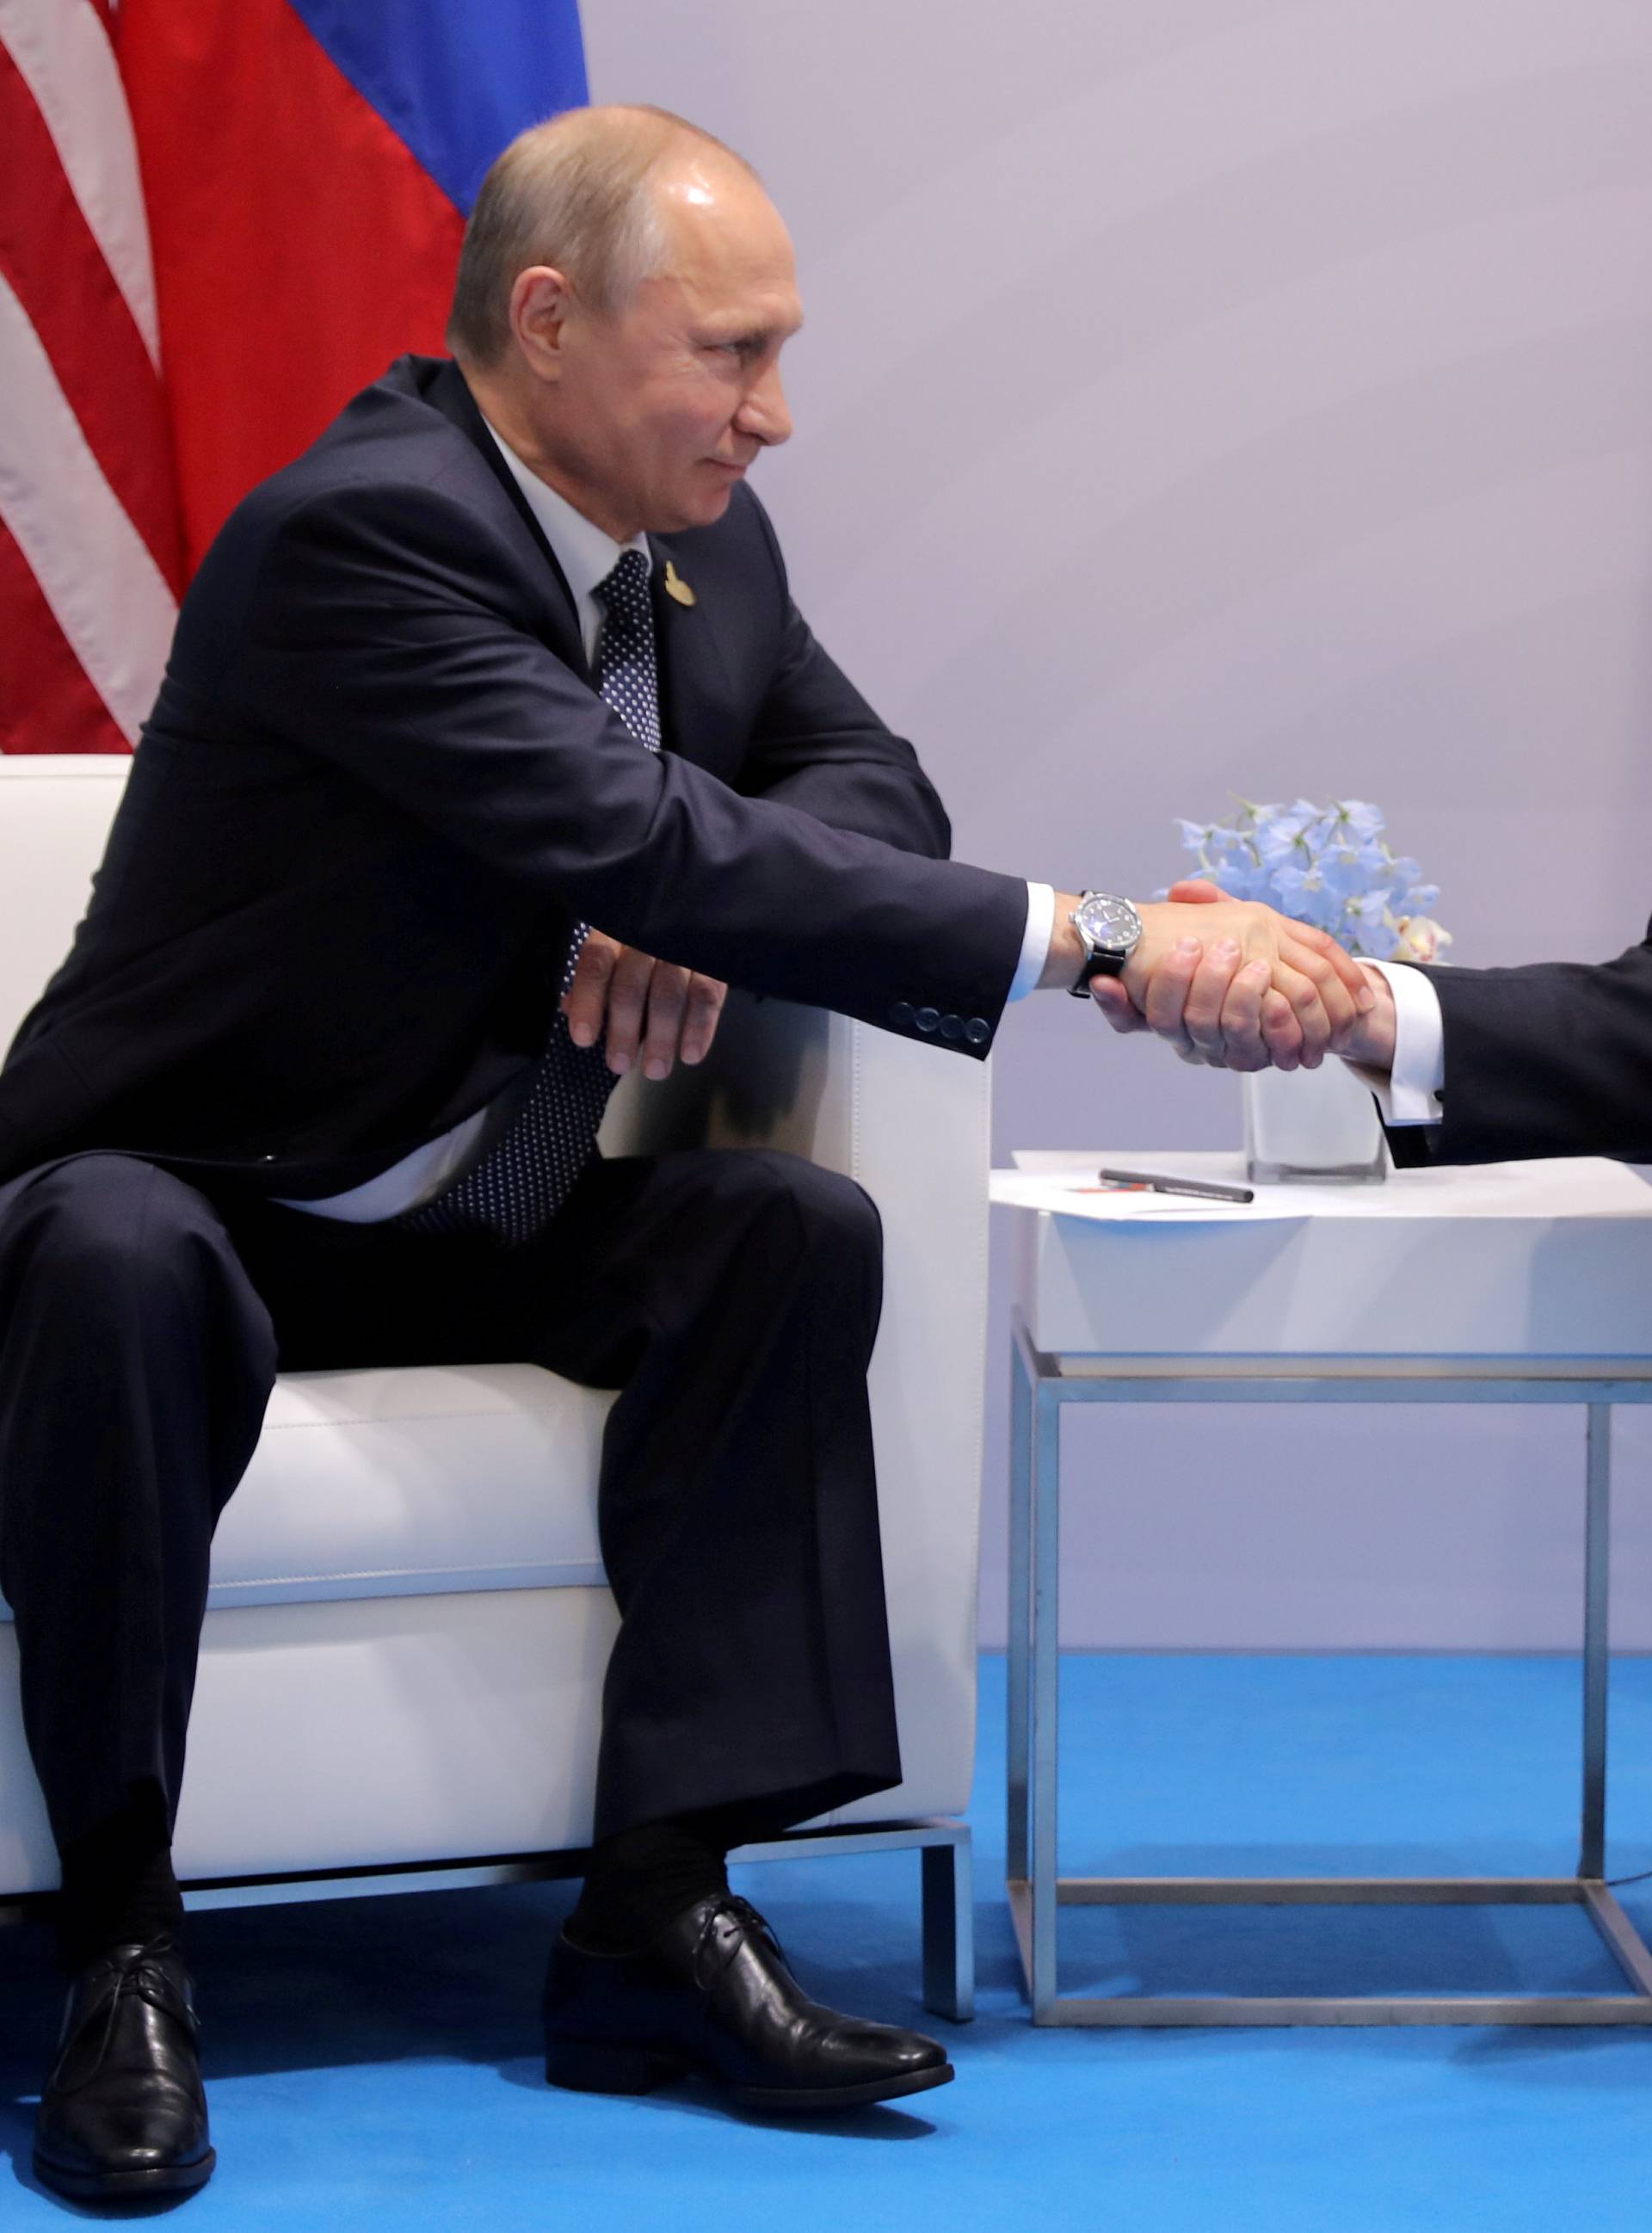 FILE PHOTO: U.S. President Donald Trump shakes hands with Russia's President Vladimir Putin during the their bilateral meeting at the G20 summit in Hamburg